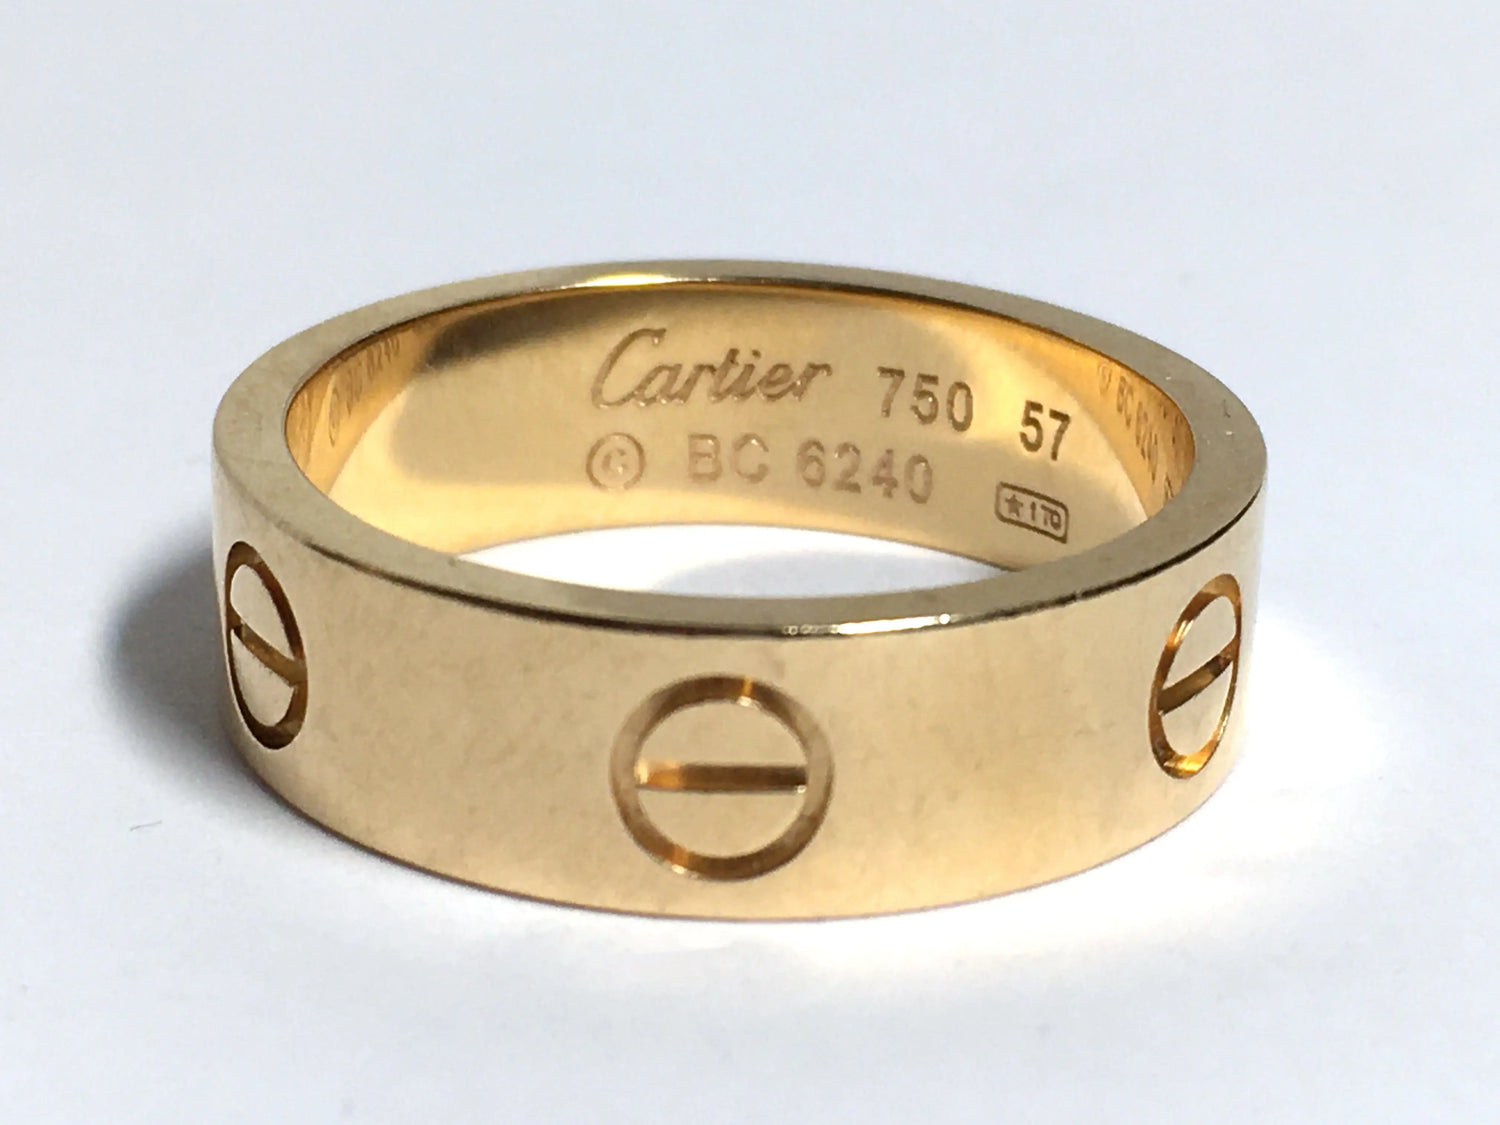 Cartier rose gold band  Size 57, 6.00 mm wide, BOX and Cartier Papers from 2000